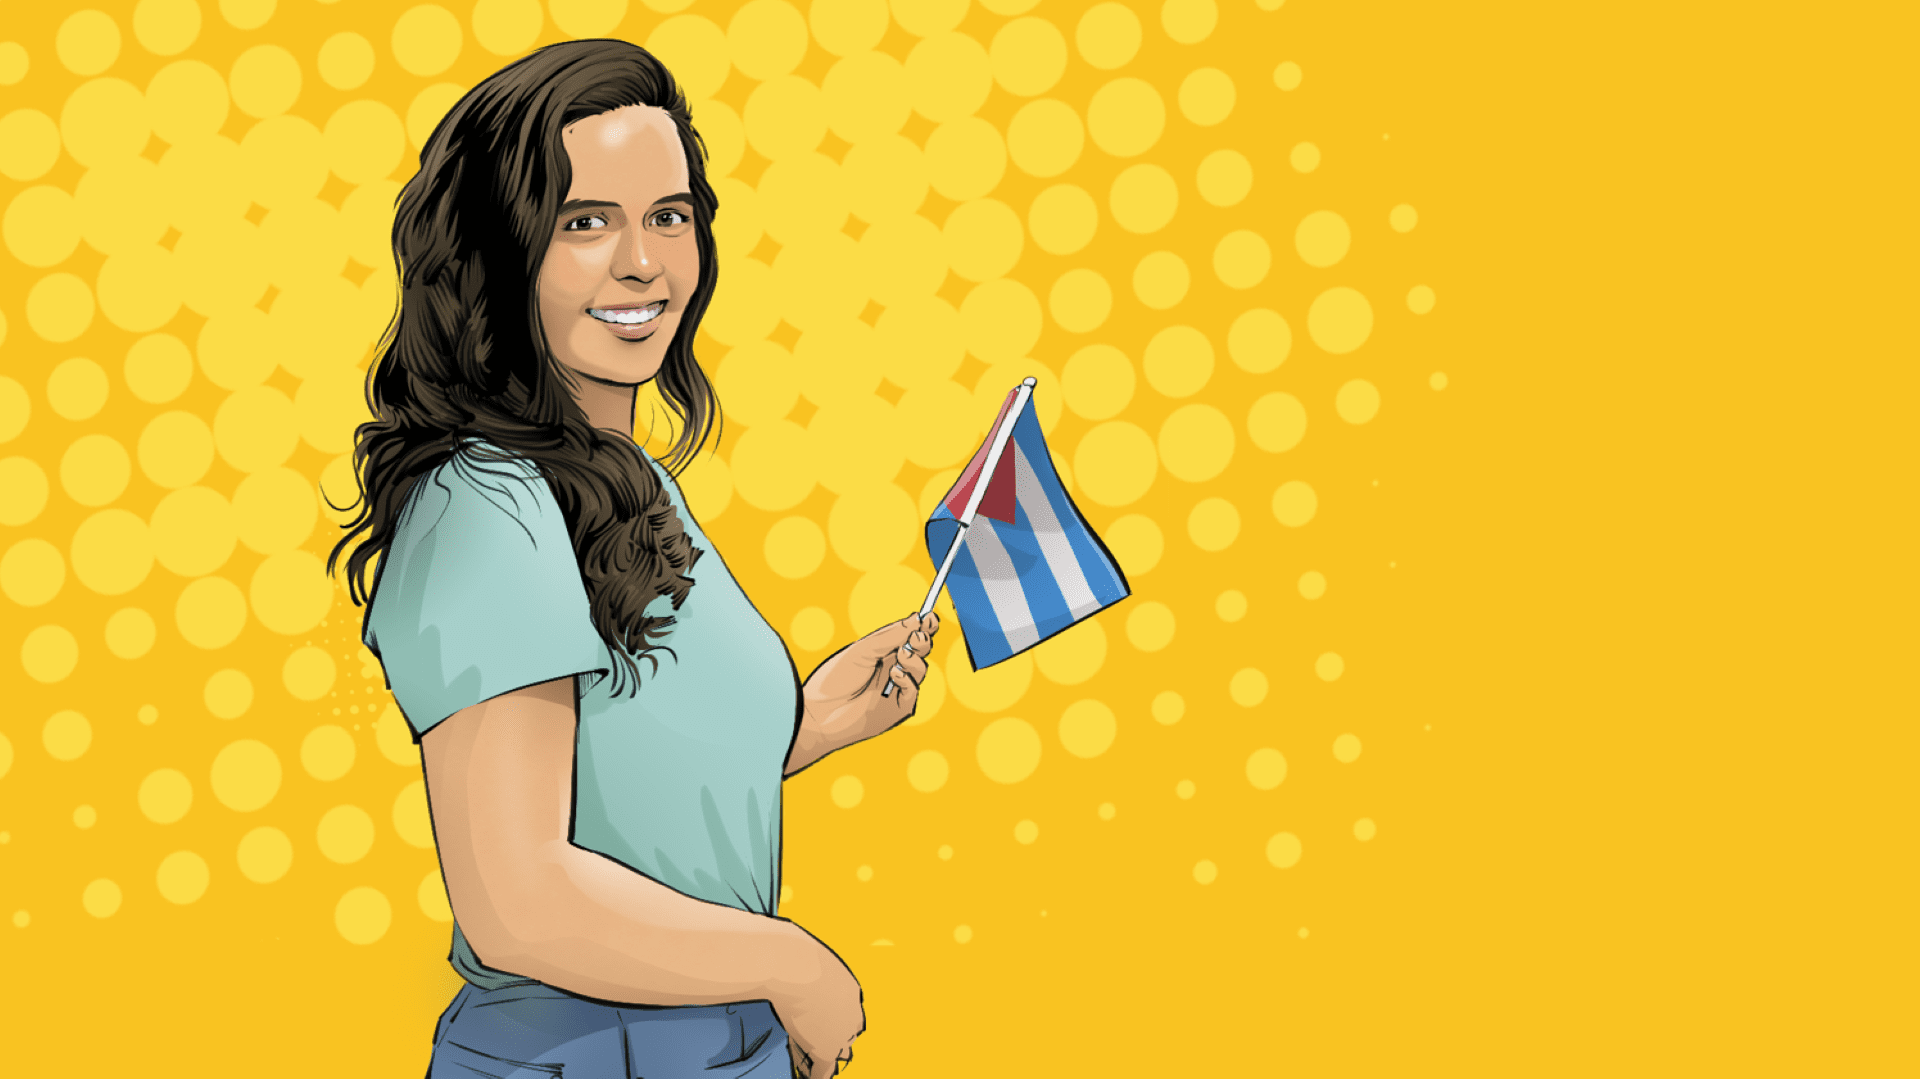 Alejandra Franganillo comes from a Cuban family that immigrated to Puerto Rico. She felt like a lone libertarian on campus until she found Students For Liberty